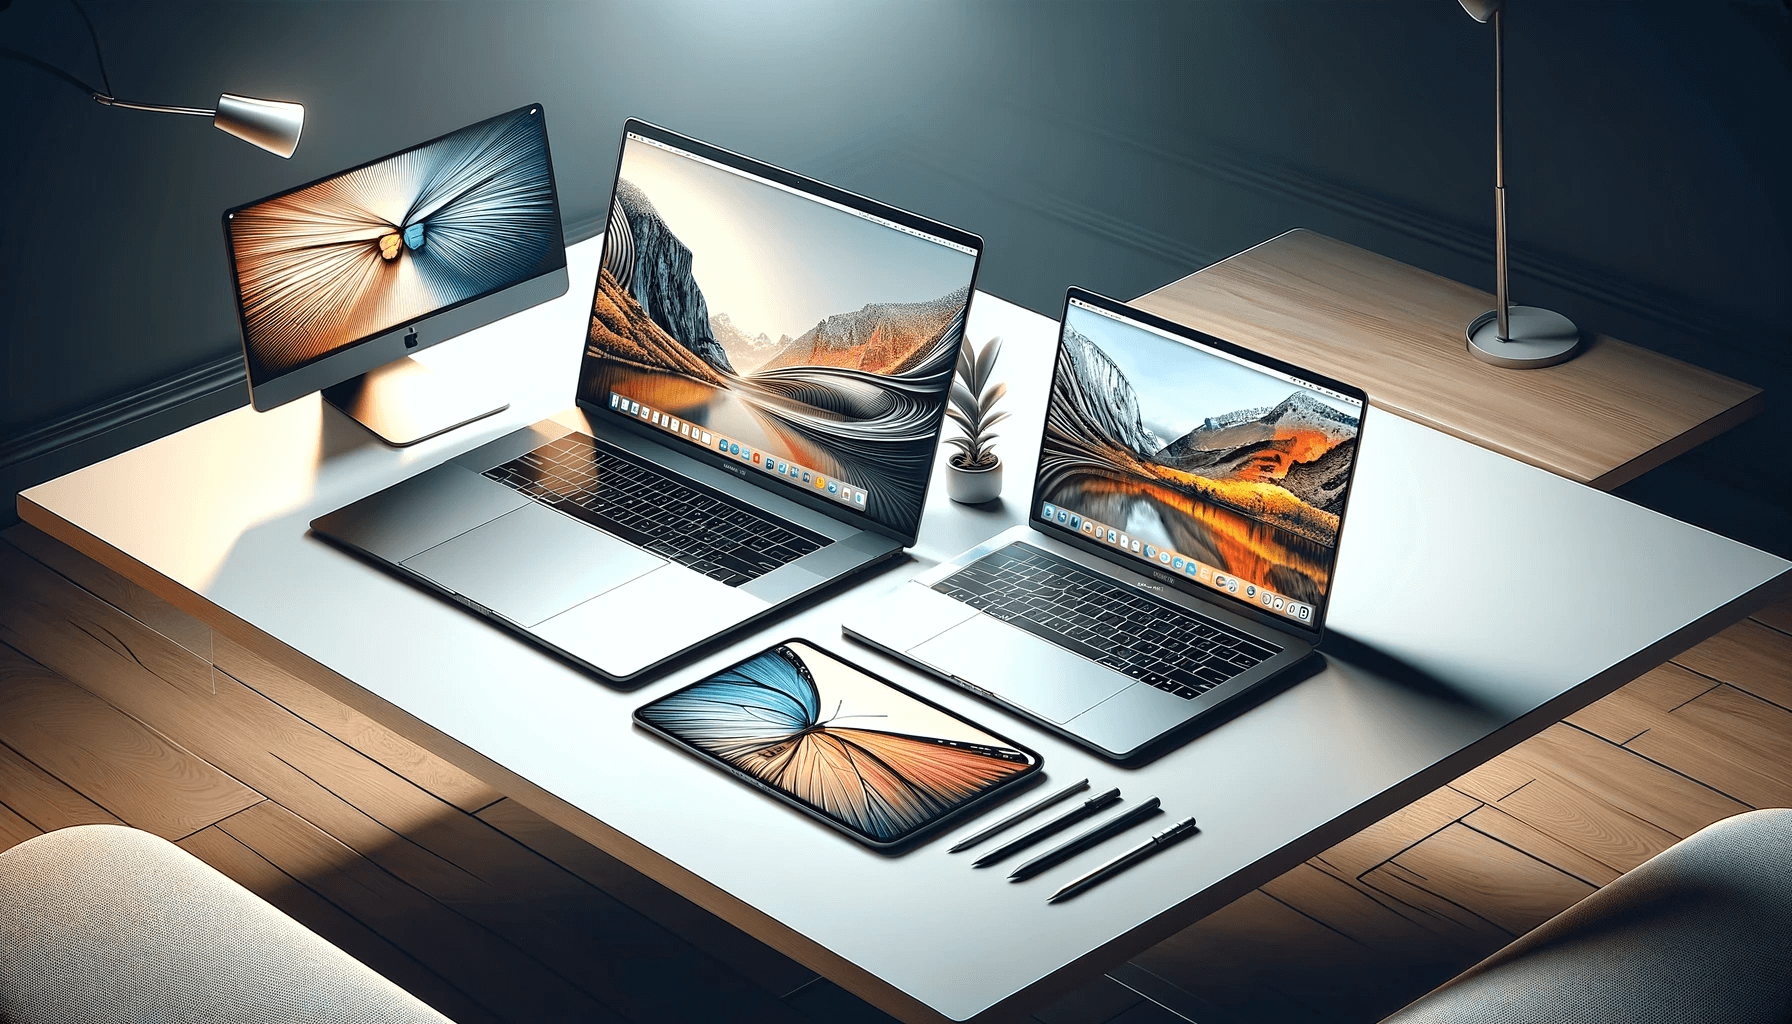 DALL·E 2023 11 22 17.40.08 A digital illustration of three different MacBooks placed on a table. The illustration features a MacBook Air a MacBook Pro and a classic MacBook e